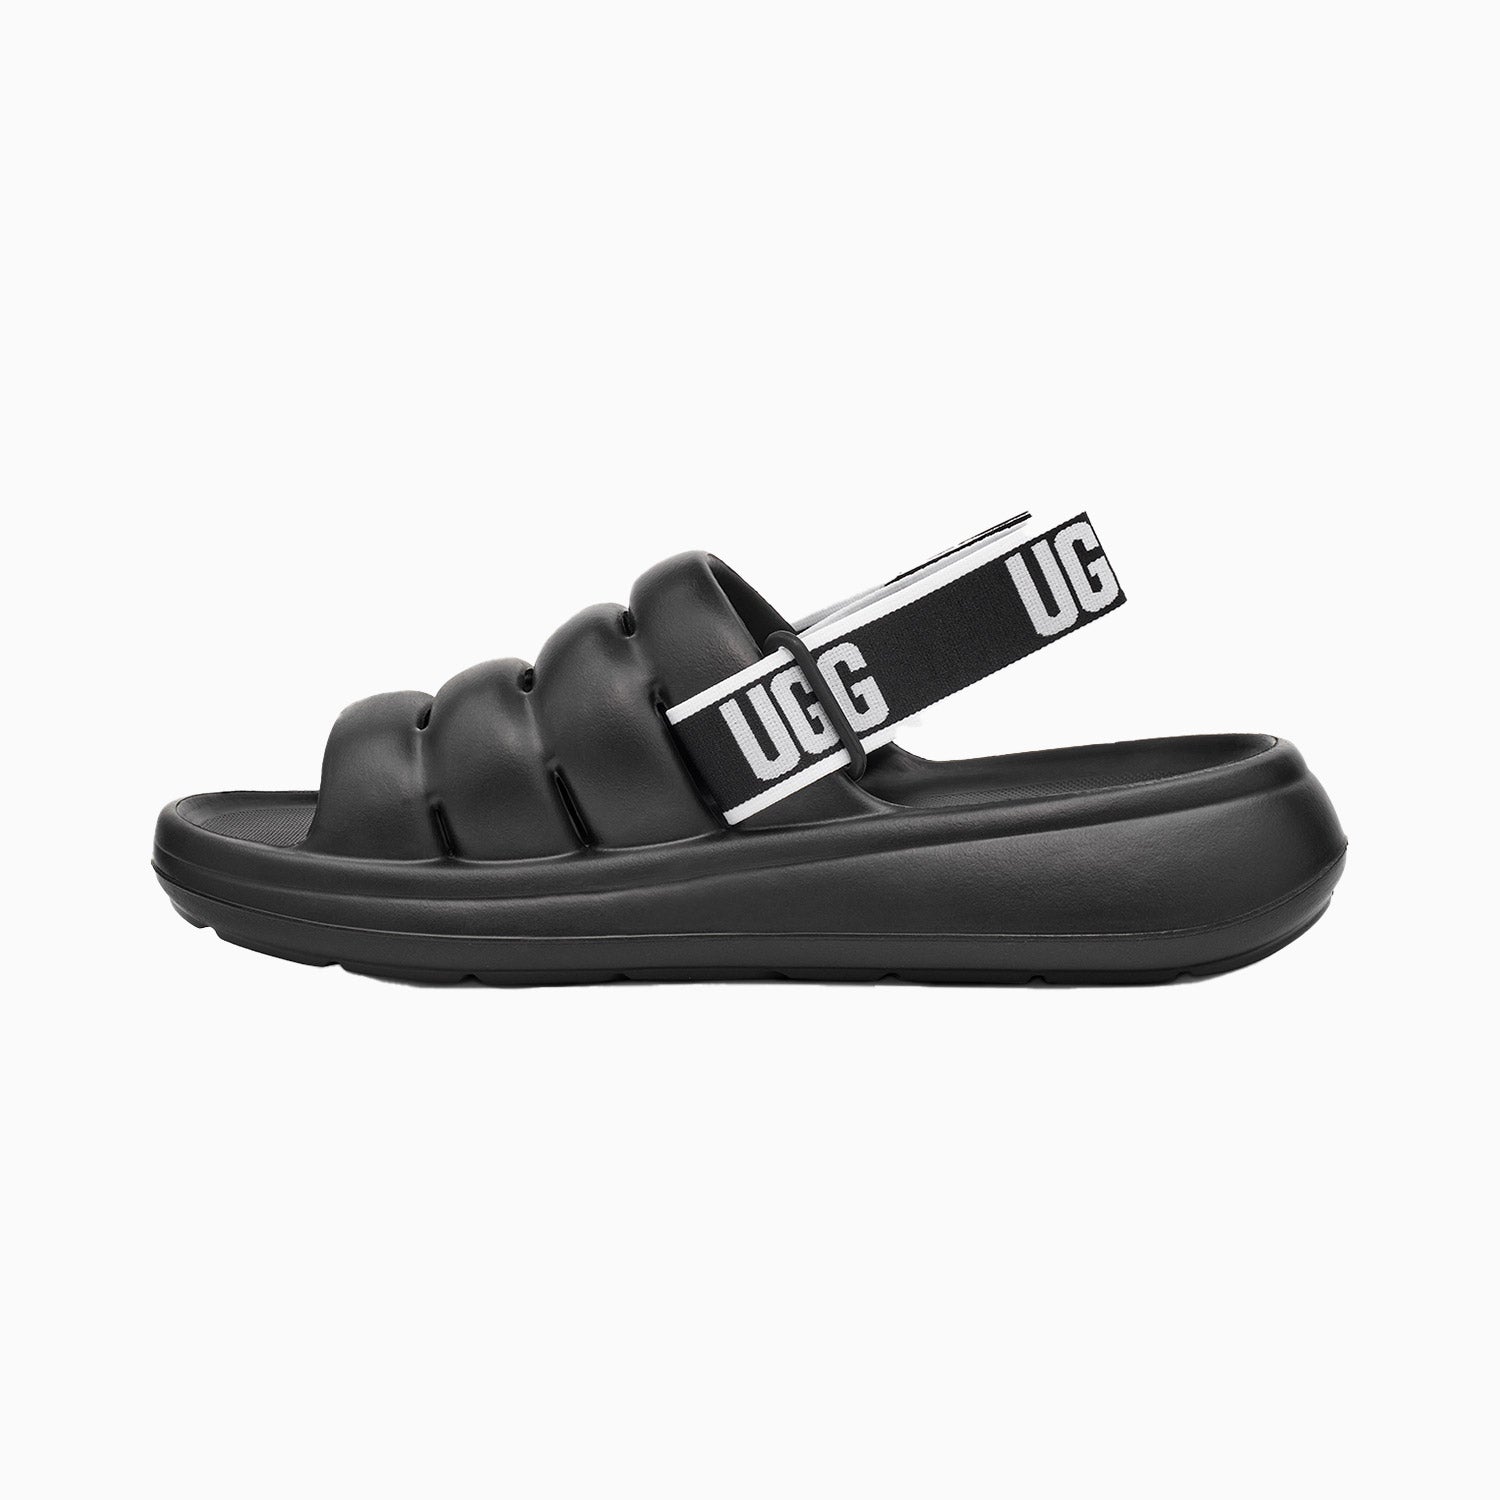 UGG Women's Sports Yeah Slide - Color: Bright White, Black - Tops and Bottoms USA -